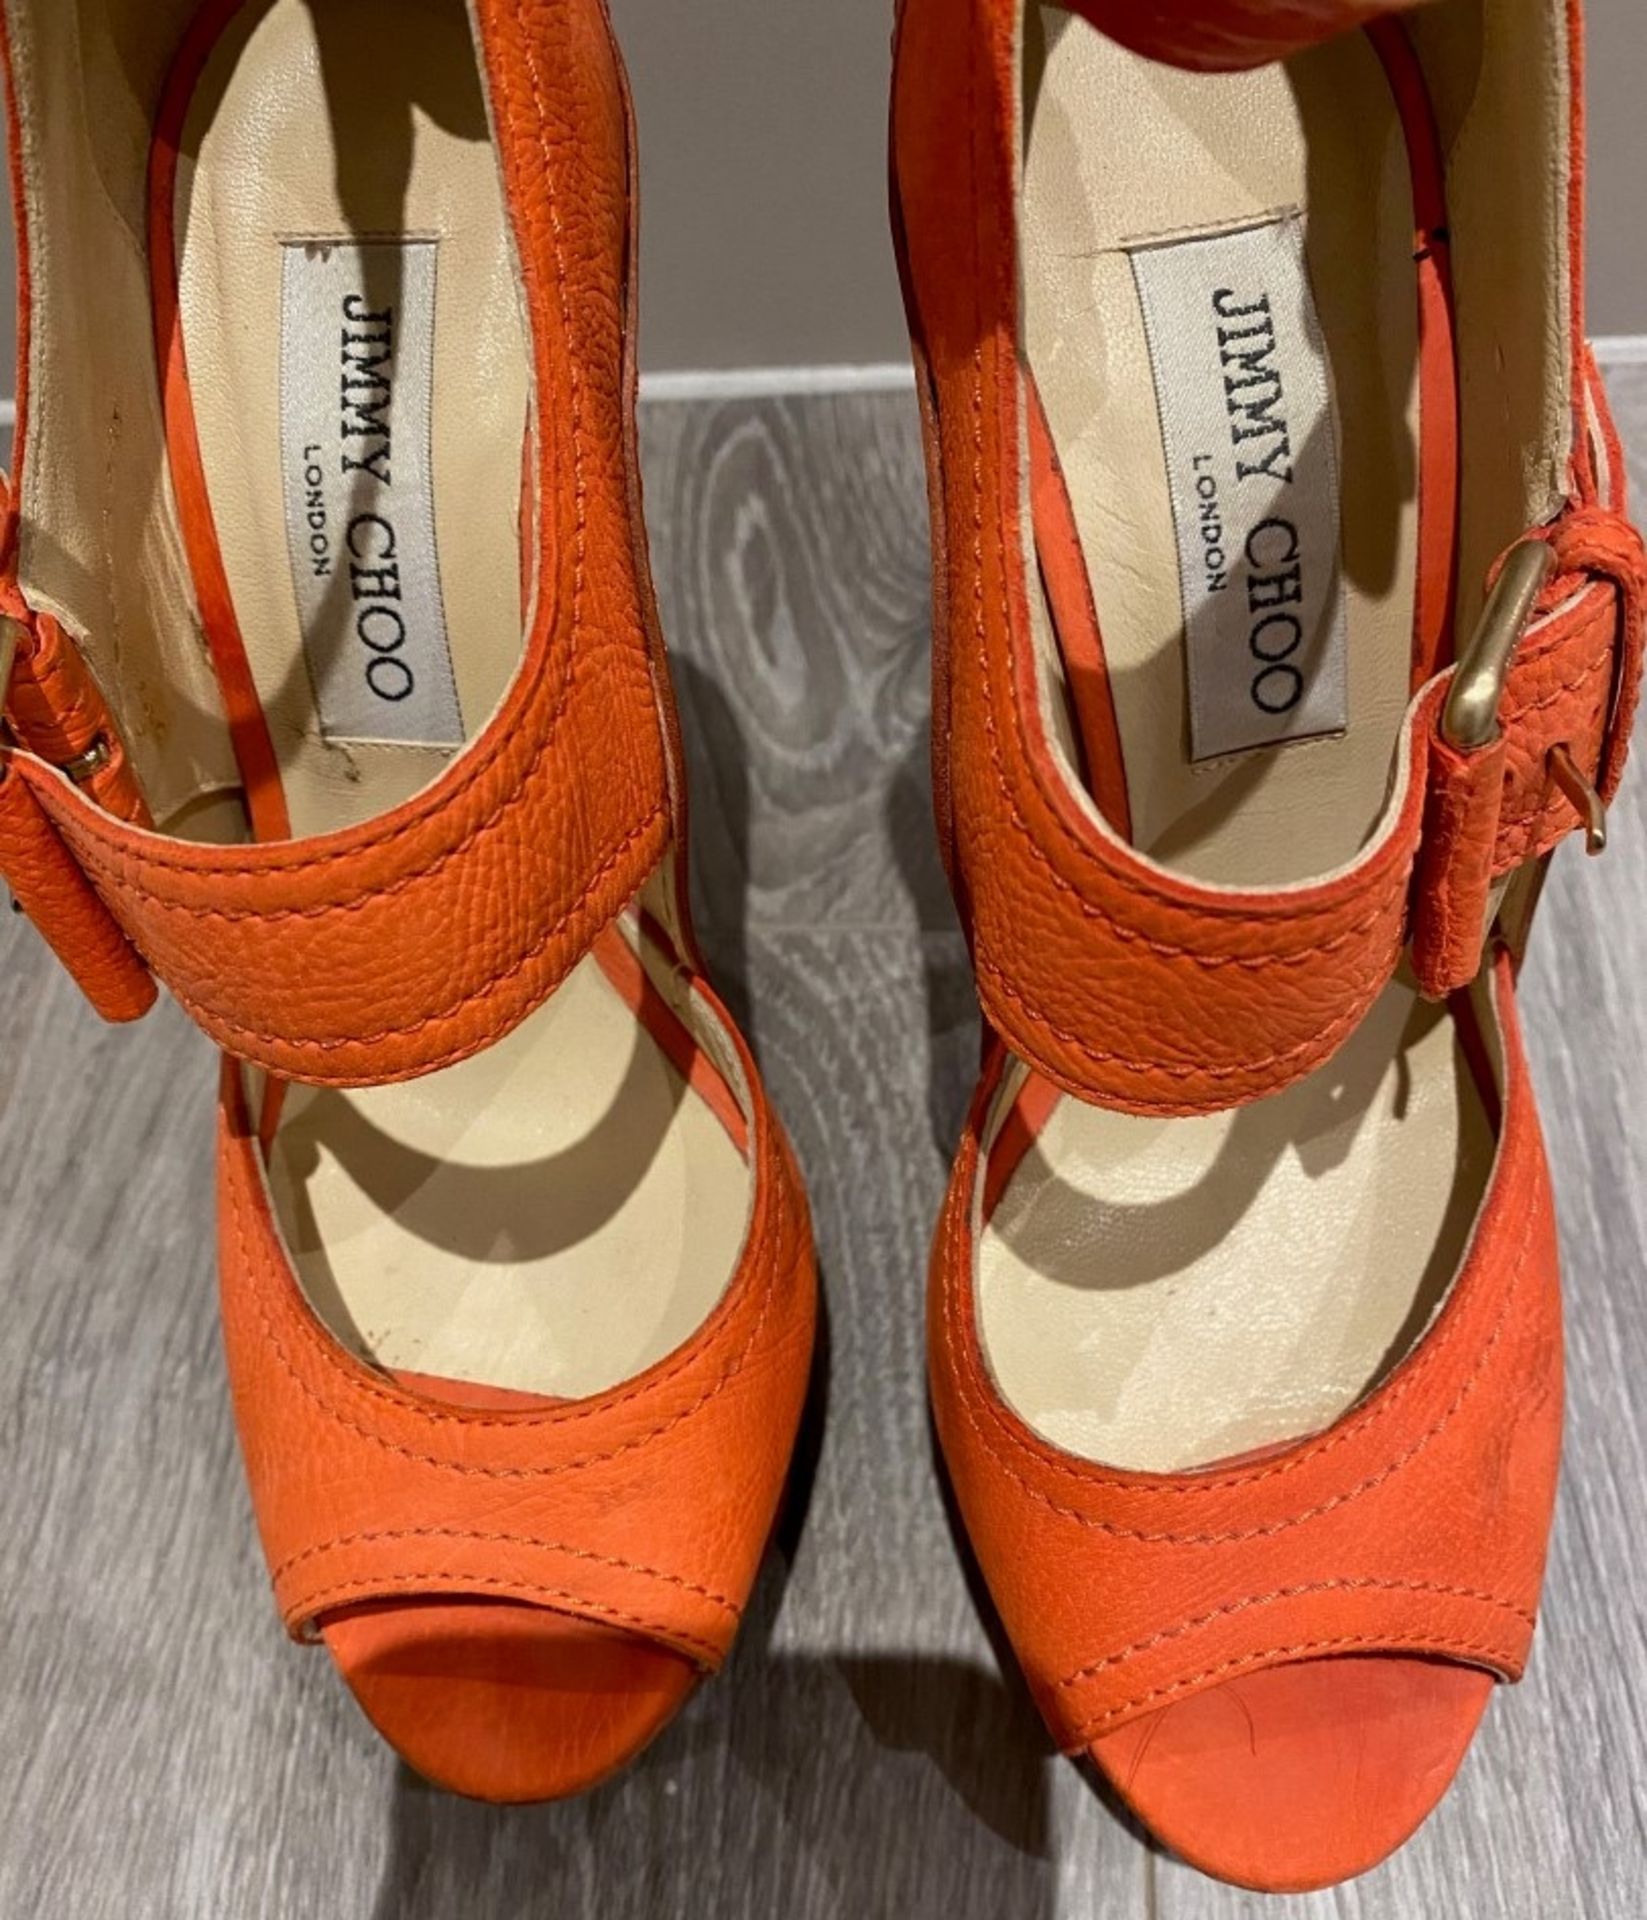 1 x Pair Of Genuine Jimmy Choo High Heel Shoes In Orange - Size: 36 - Preowned in Good Condition - R - Image 4 of 5